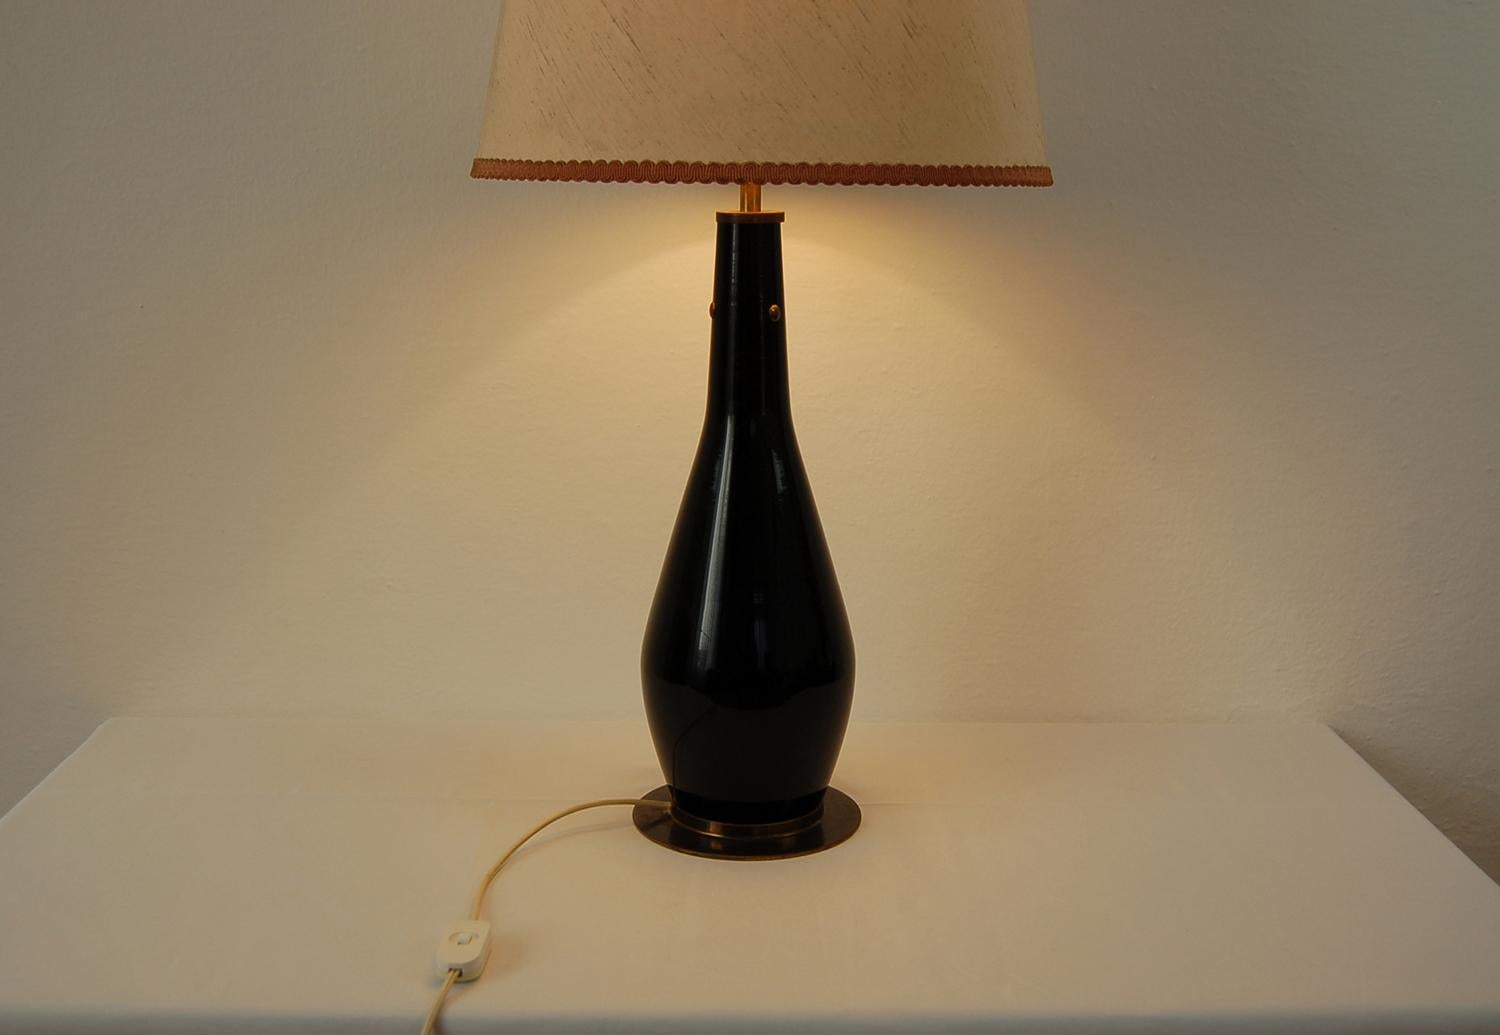 Italian Midcentury Table Lamp in Black Glass and Fabric Lampshade by Stilnovo, 1950s For Sale